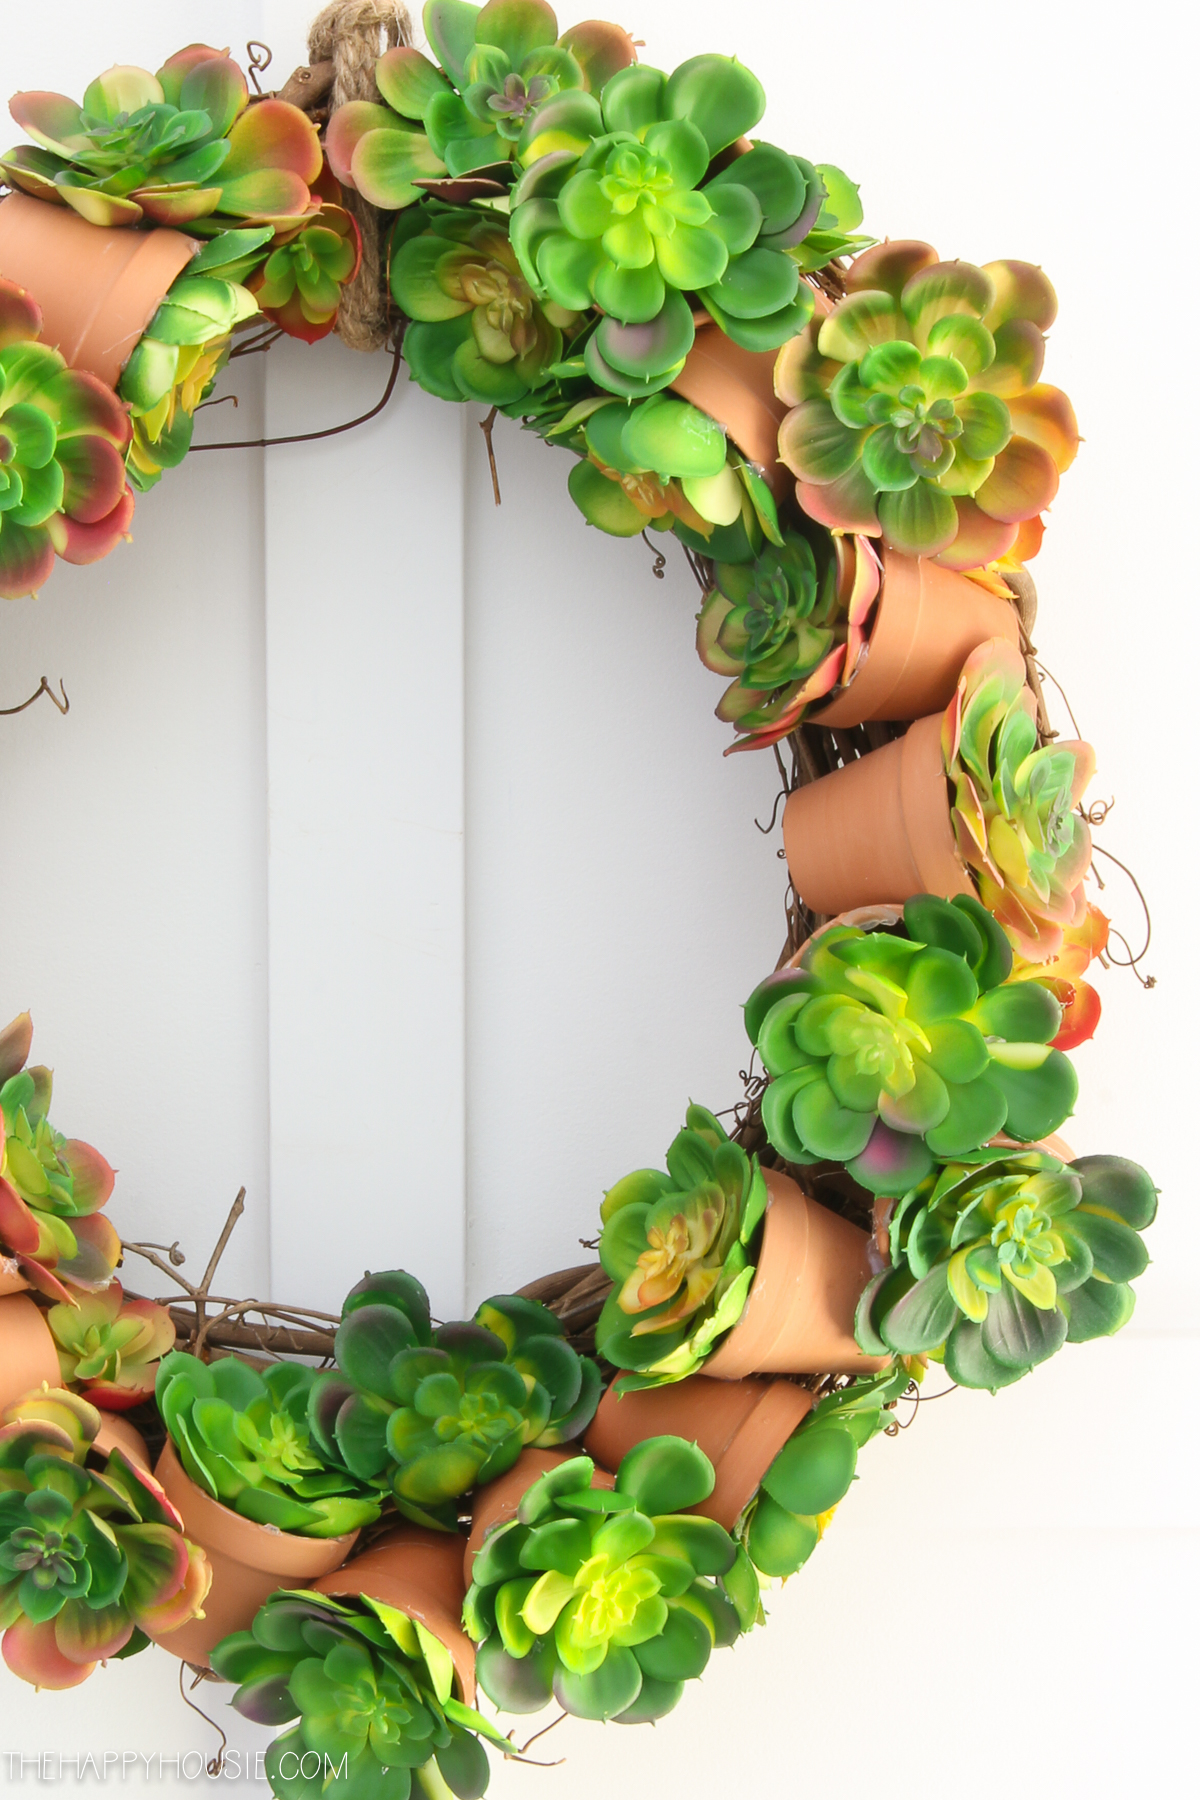 All the little clay pots on the wreath.